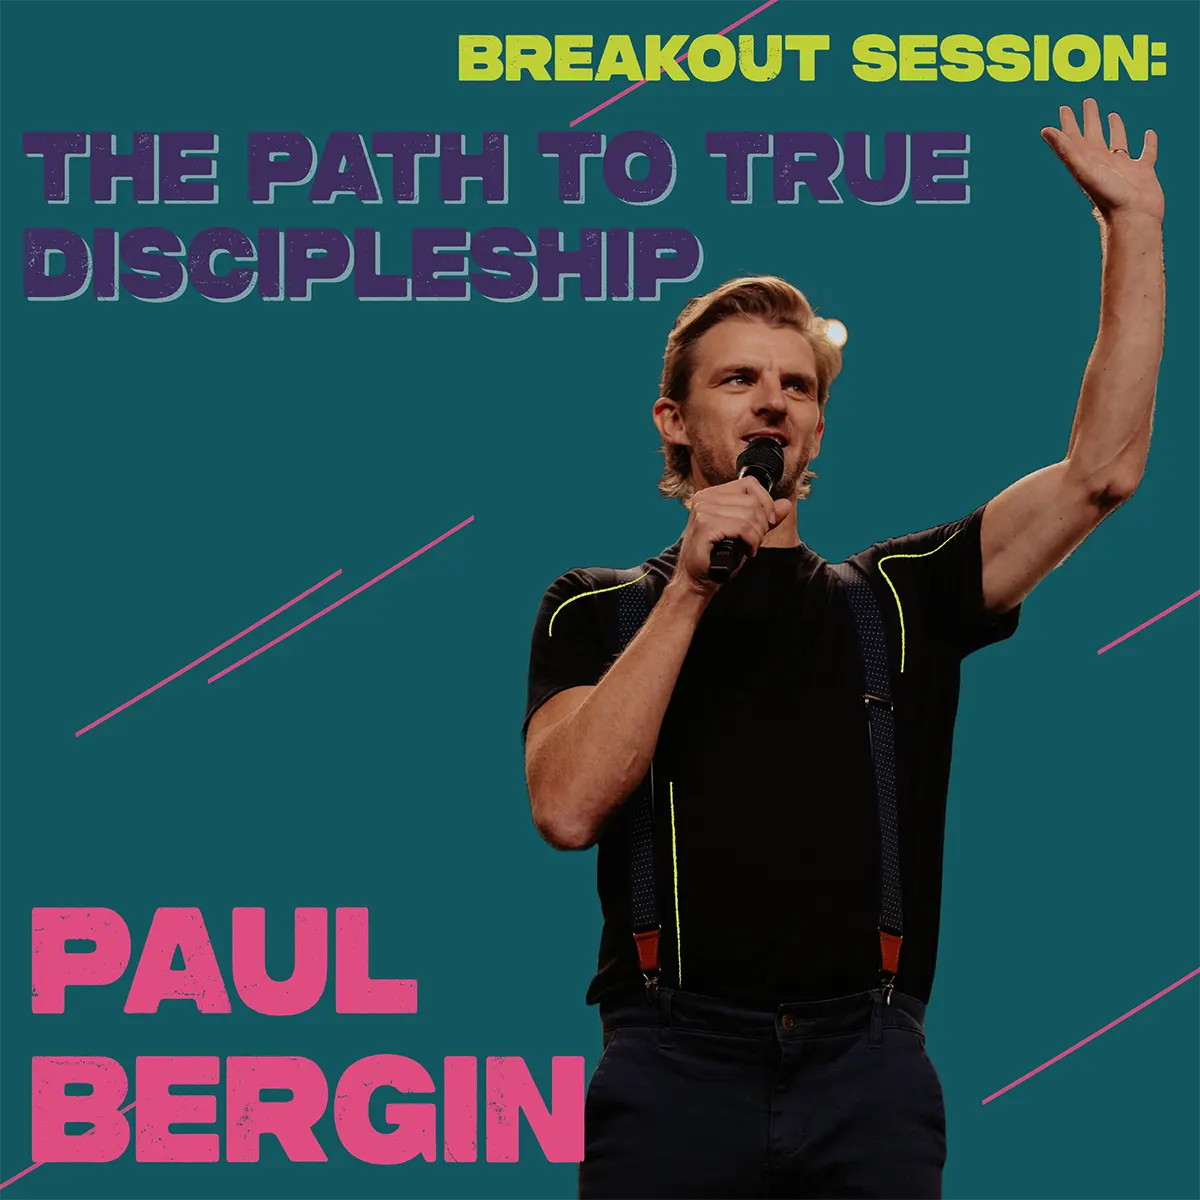 Now or Never Breakout Session - Paul Bergin